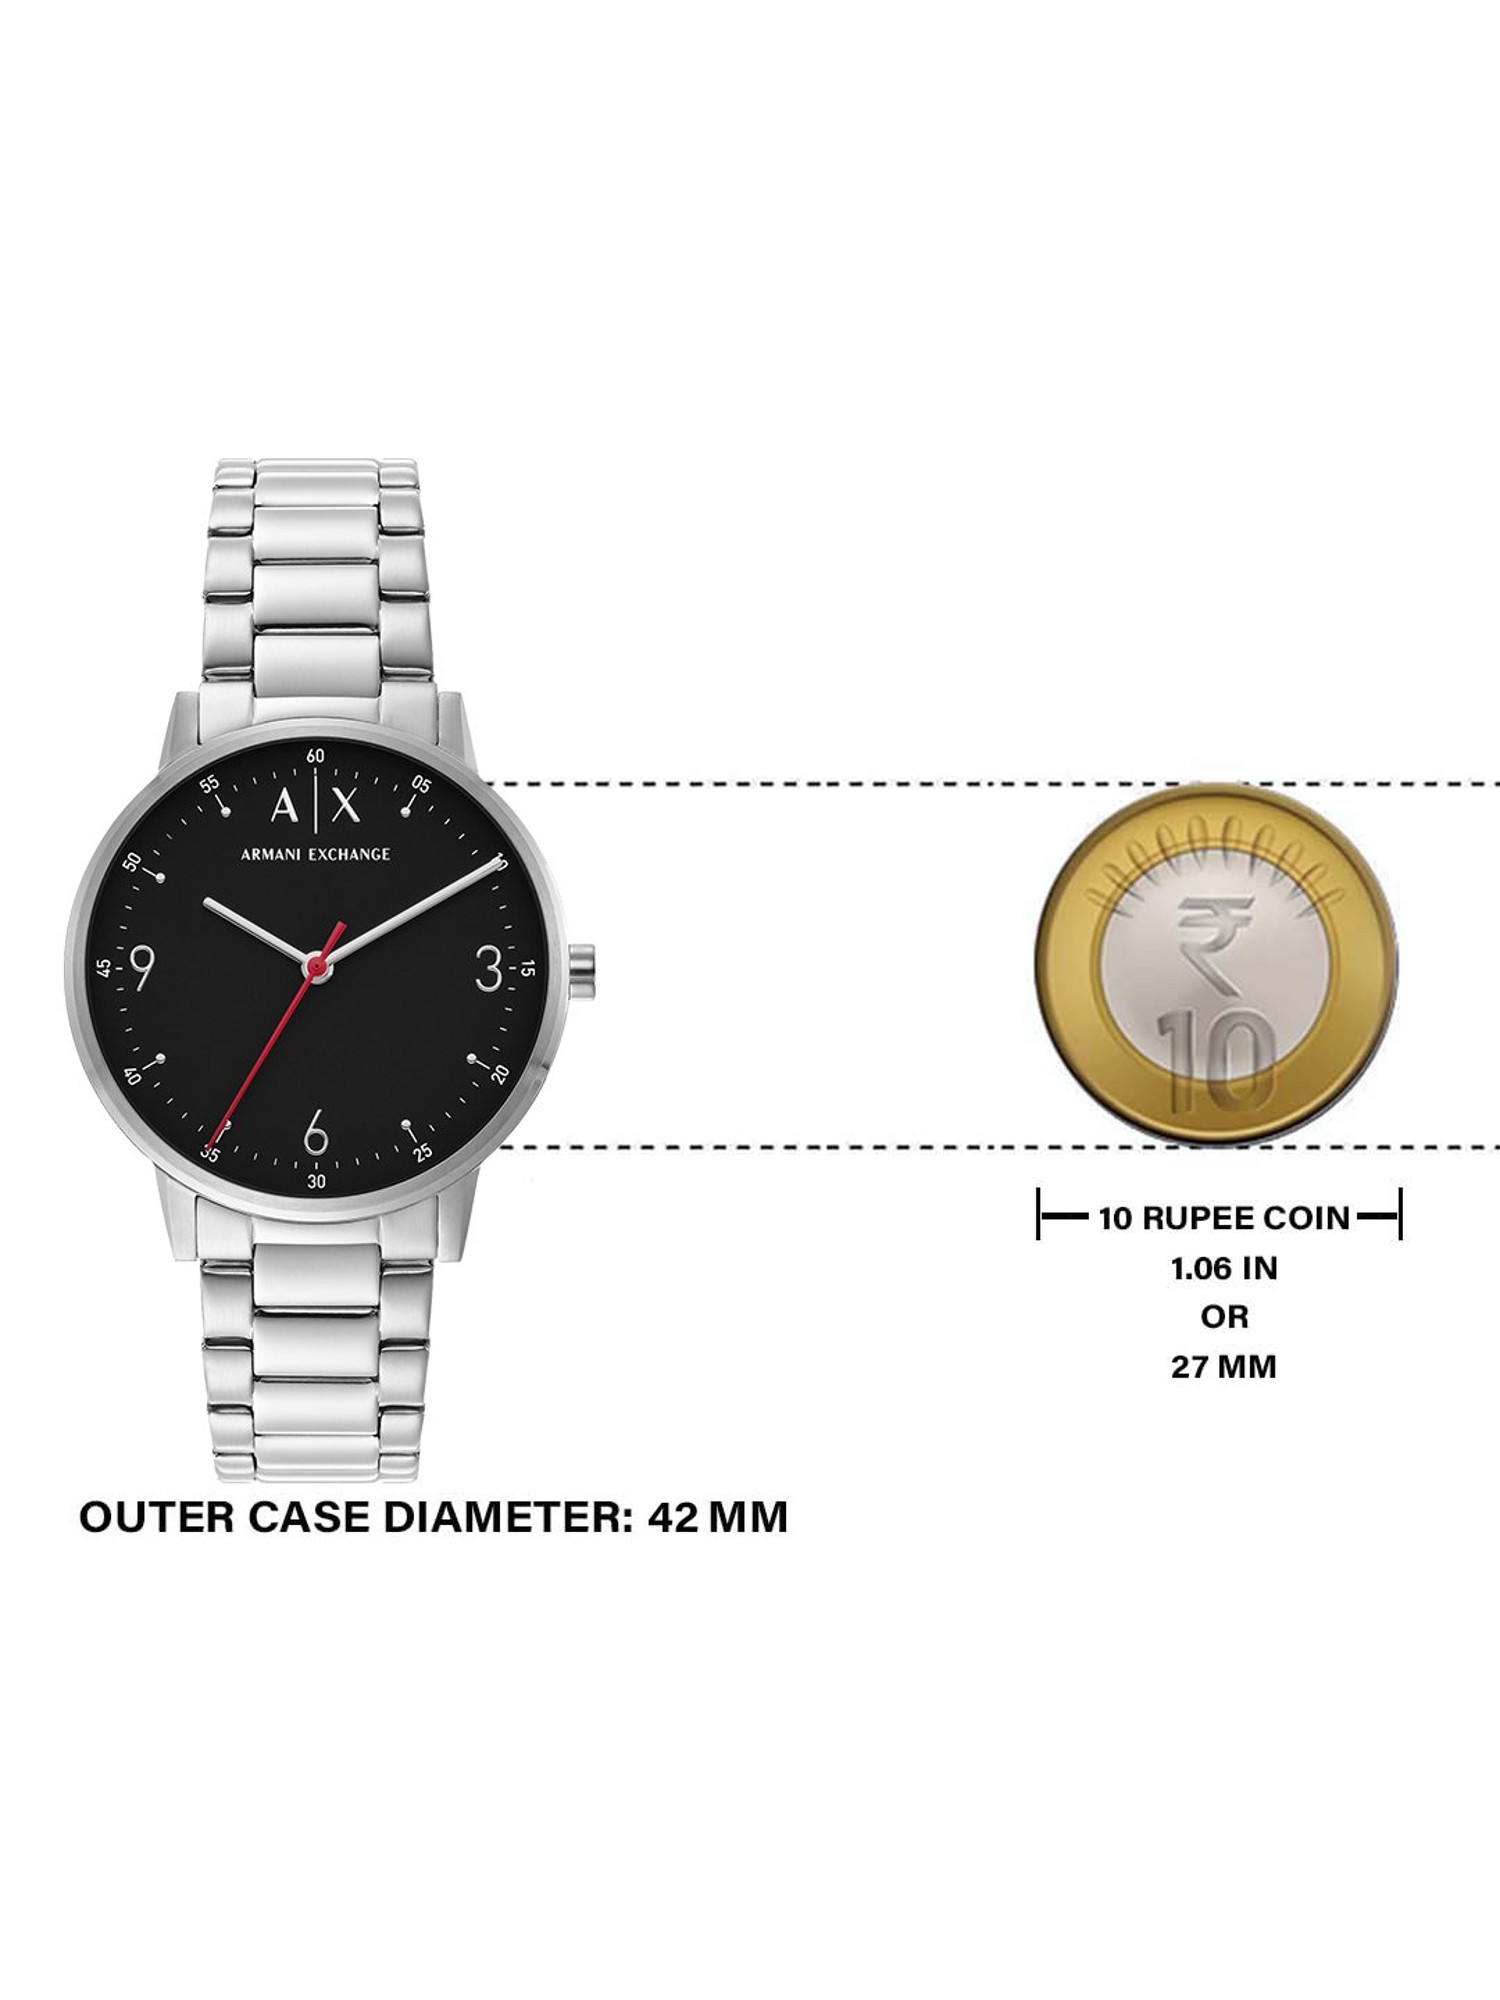 Buy CLiQ Best Watch at Price Men Cayde Analog ARMANI Tata @ AX2737 for EXCHANGE